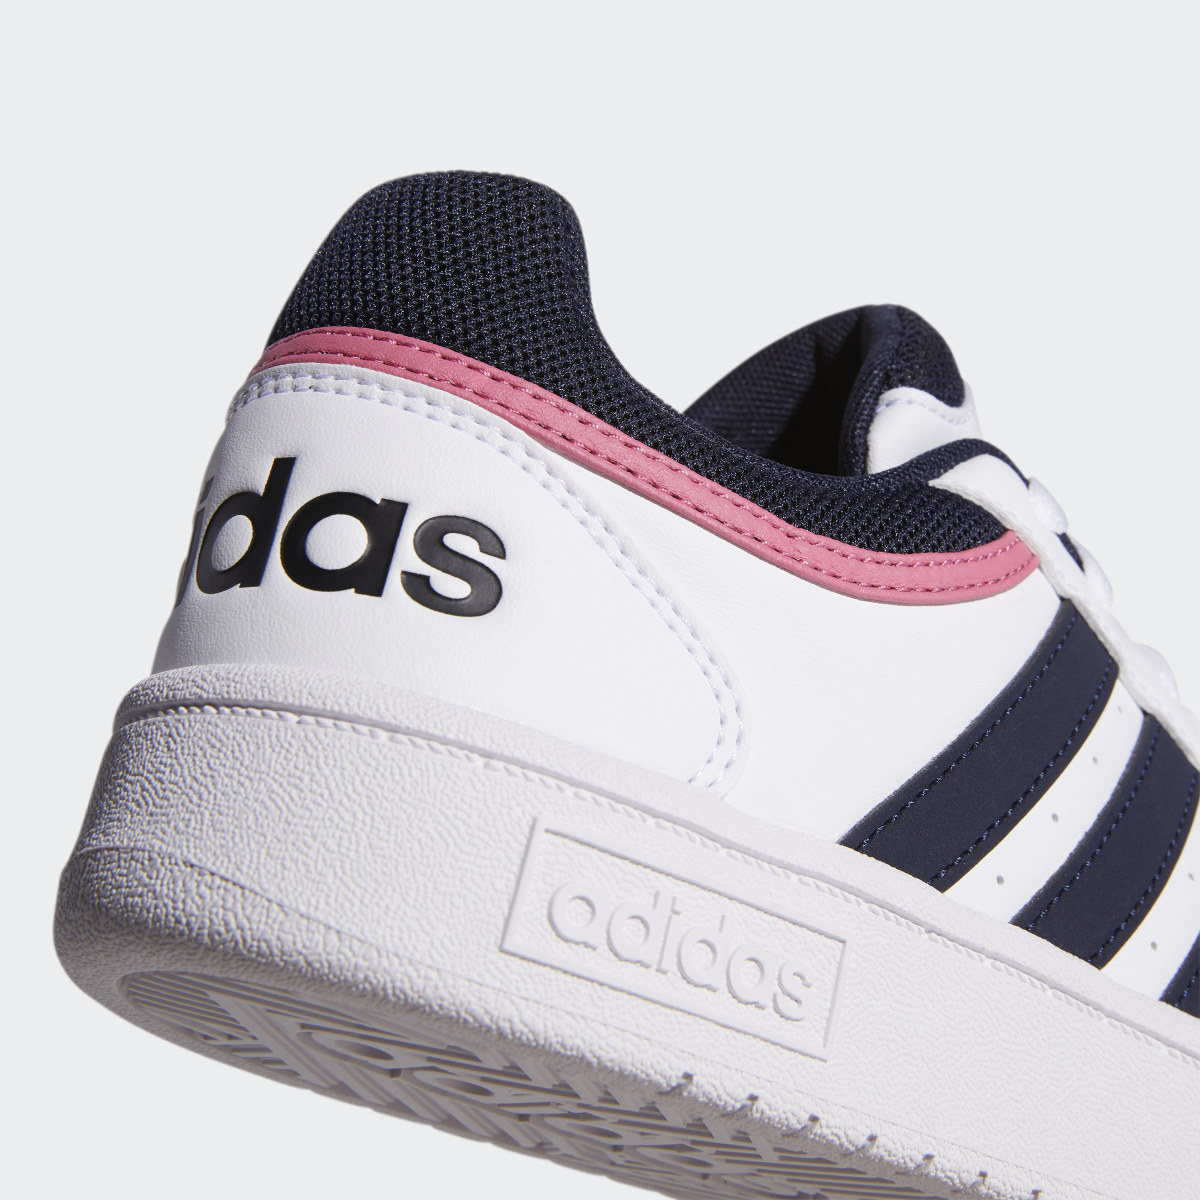 Adidas Hoops 3.0 Low Classic Schuh. 9